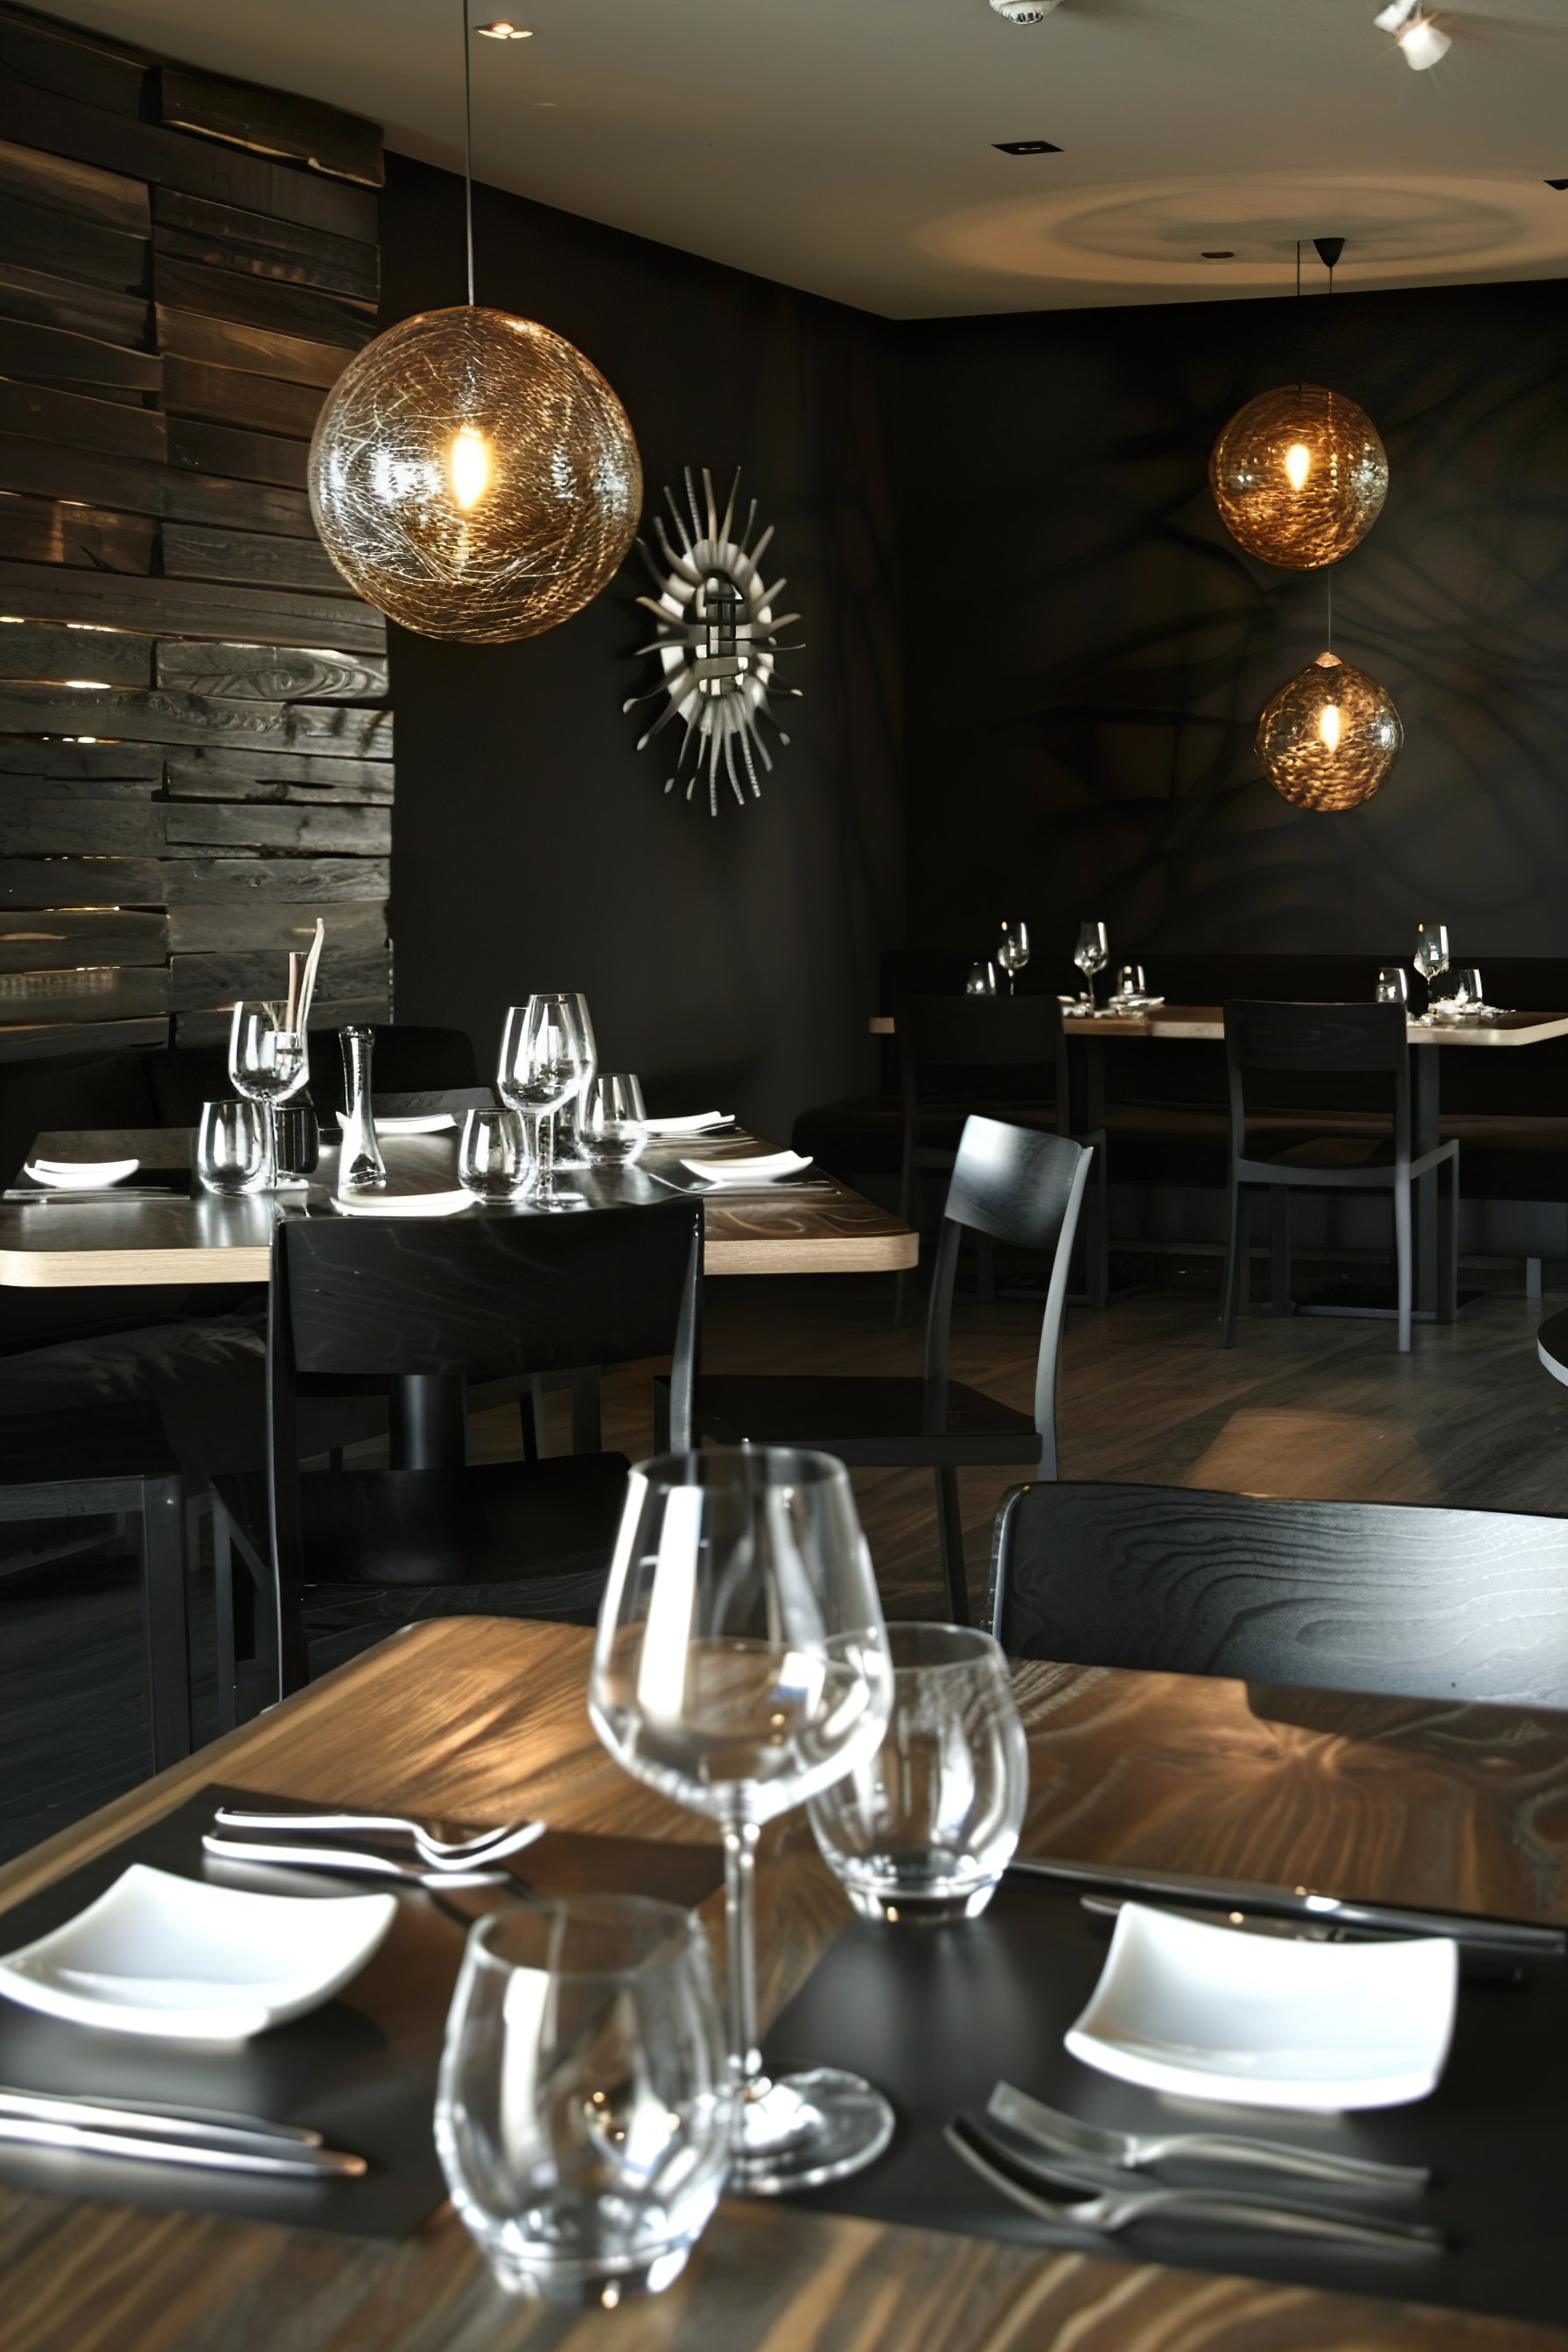 Elegant restaurant interior with modern lighting, dark wooden tables set with glassware and plates.